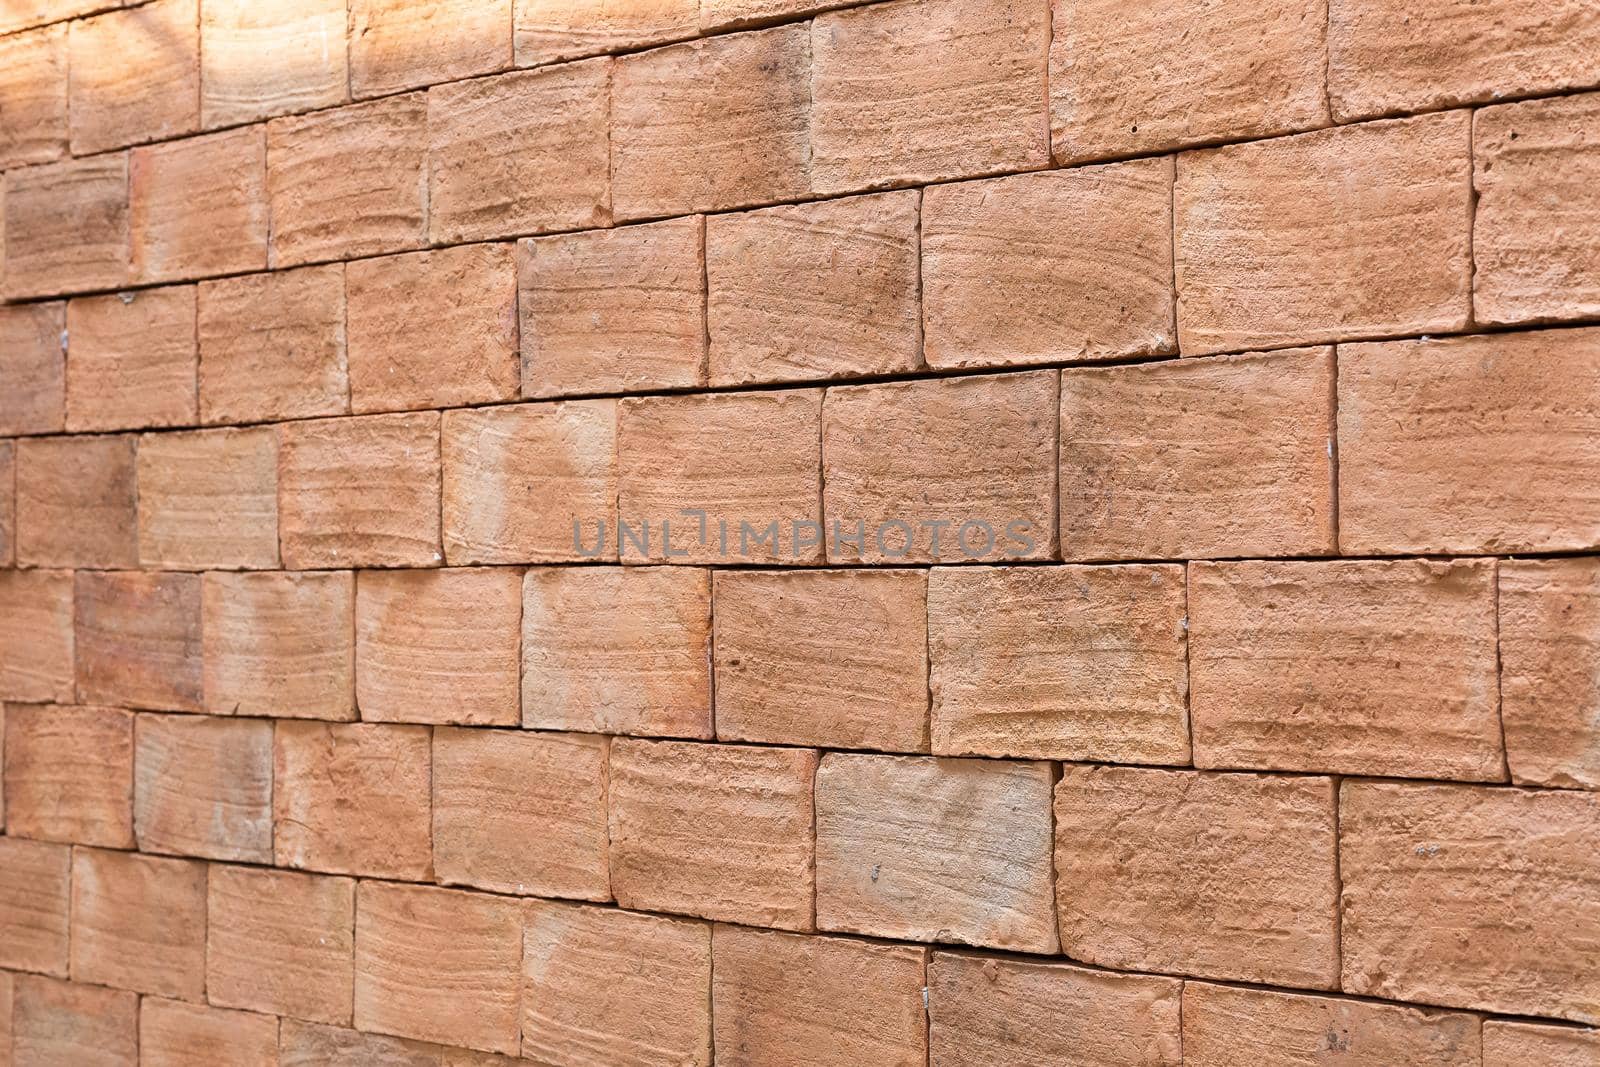 Close up old red brick wall seamless background, brown retro grunge pattern surface architecture structure